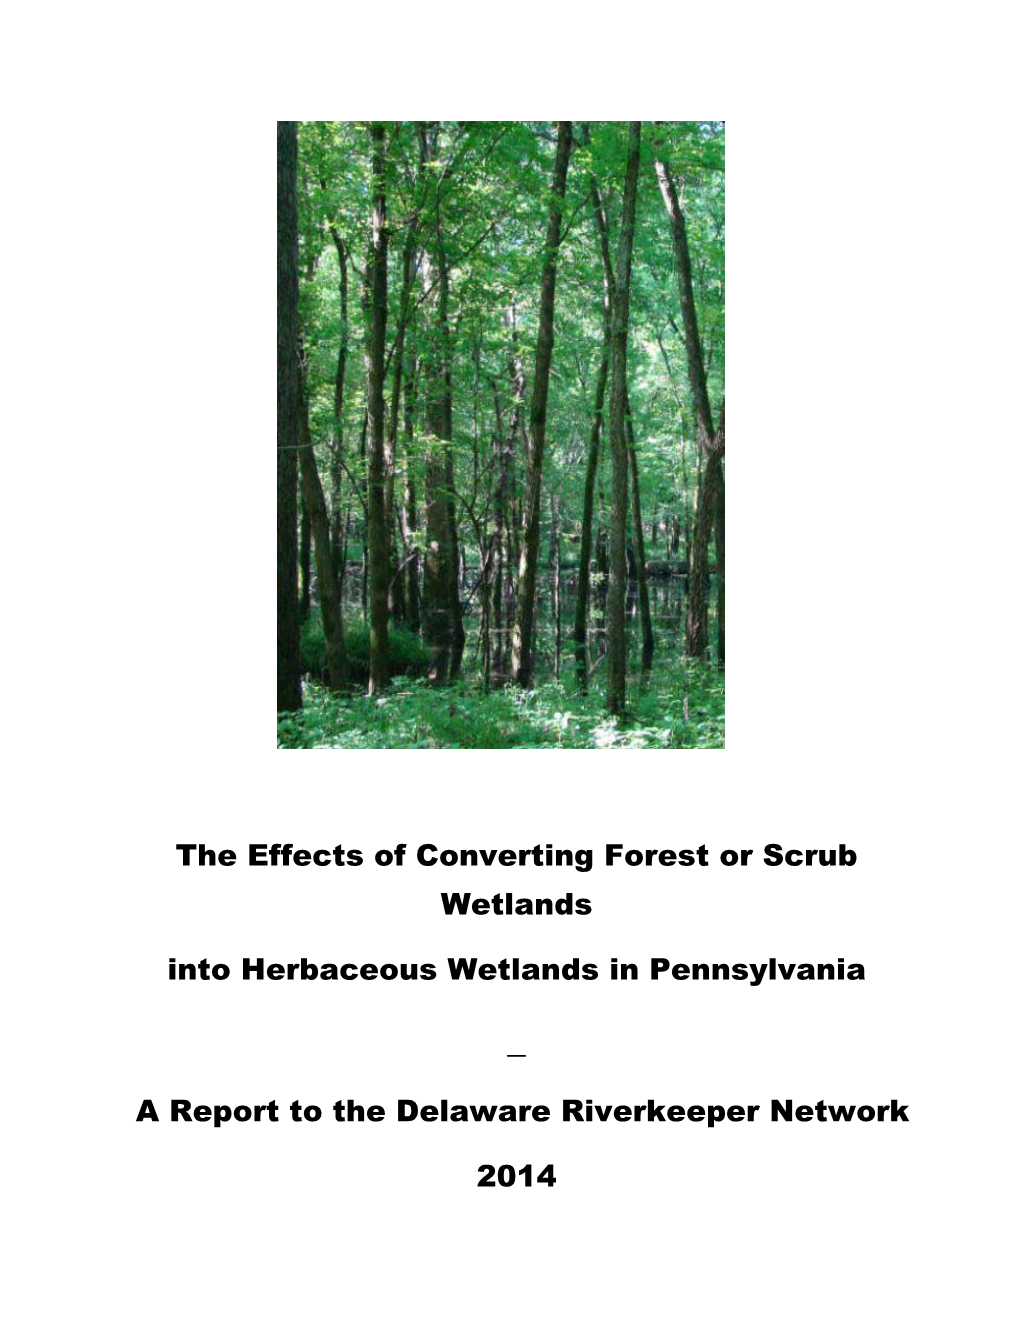 The Effects of Converting Forest Or Scrub Wetlands Into Herbaceous Wetlands in Pennsylvania